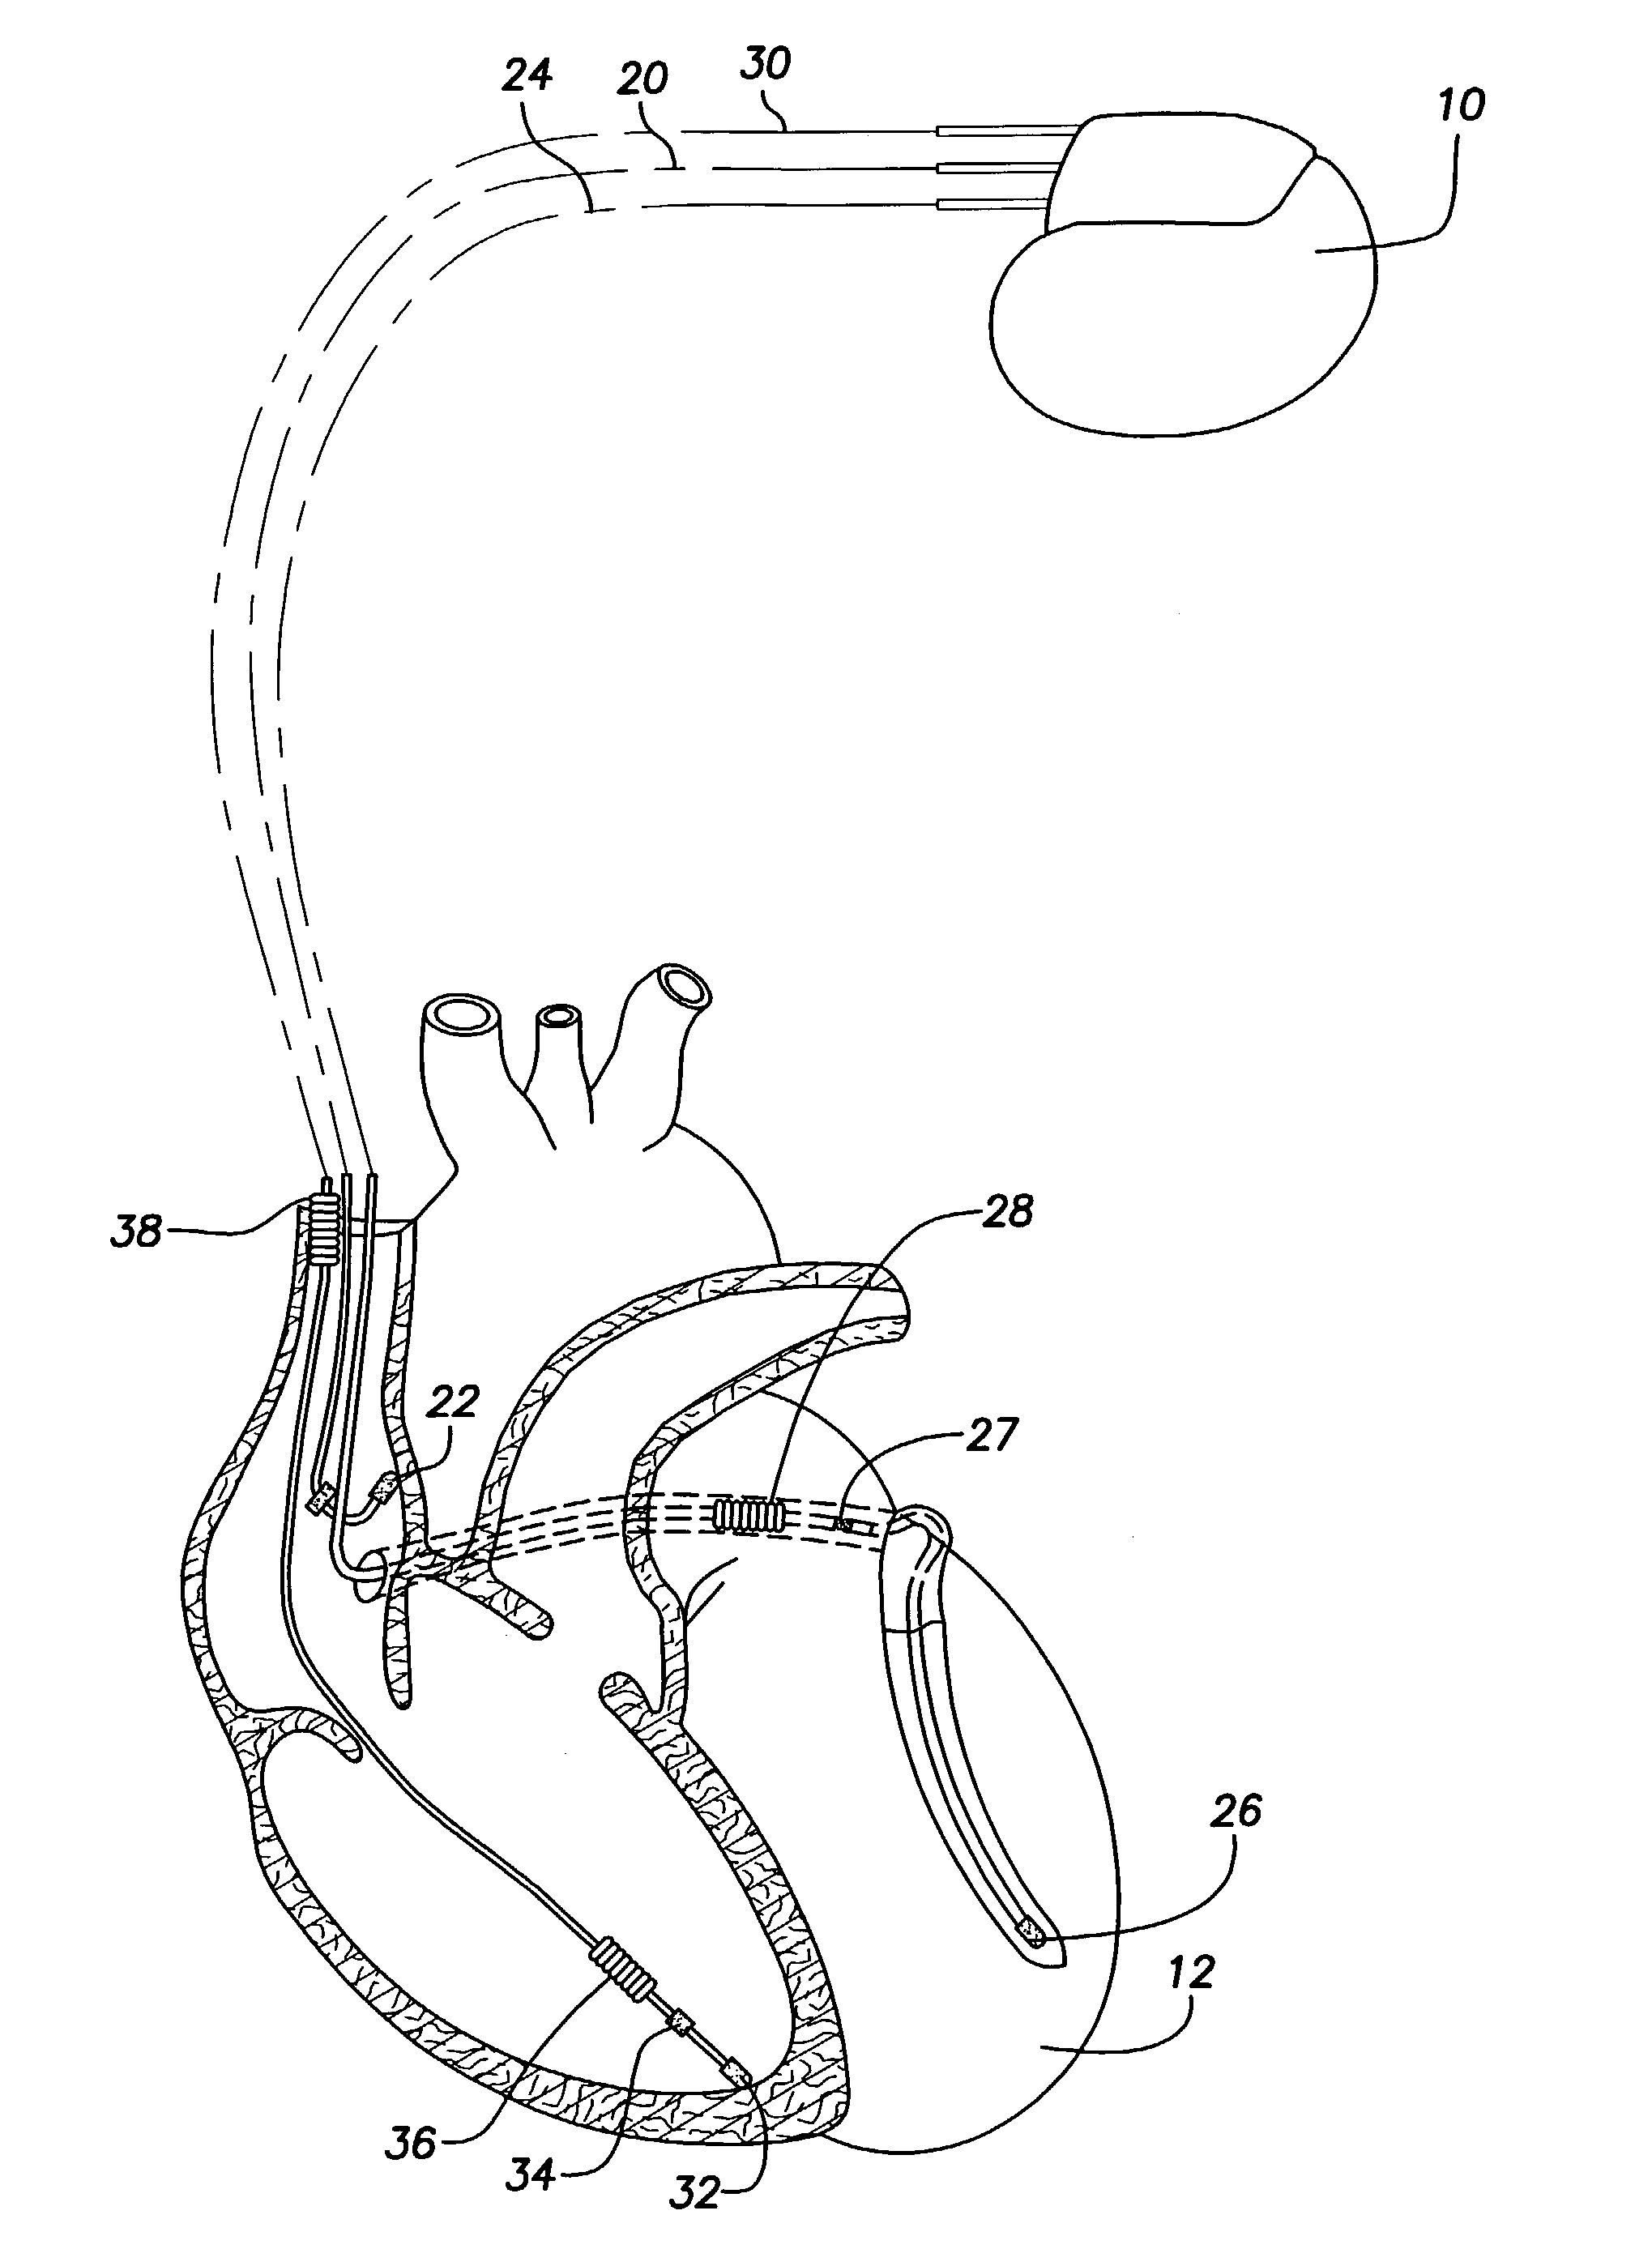 System and method for determining patient posture based on 3-D trajectory using an implantable medical device